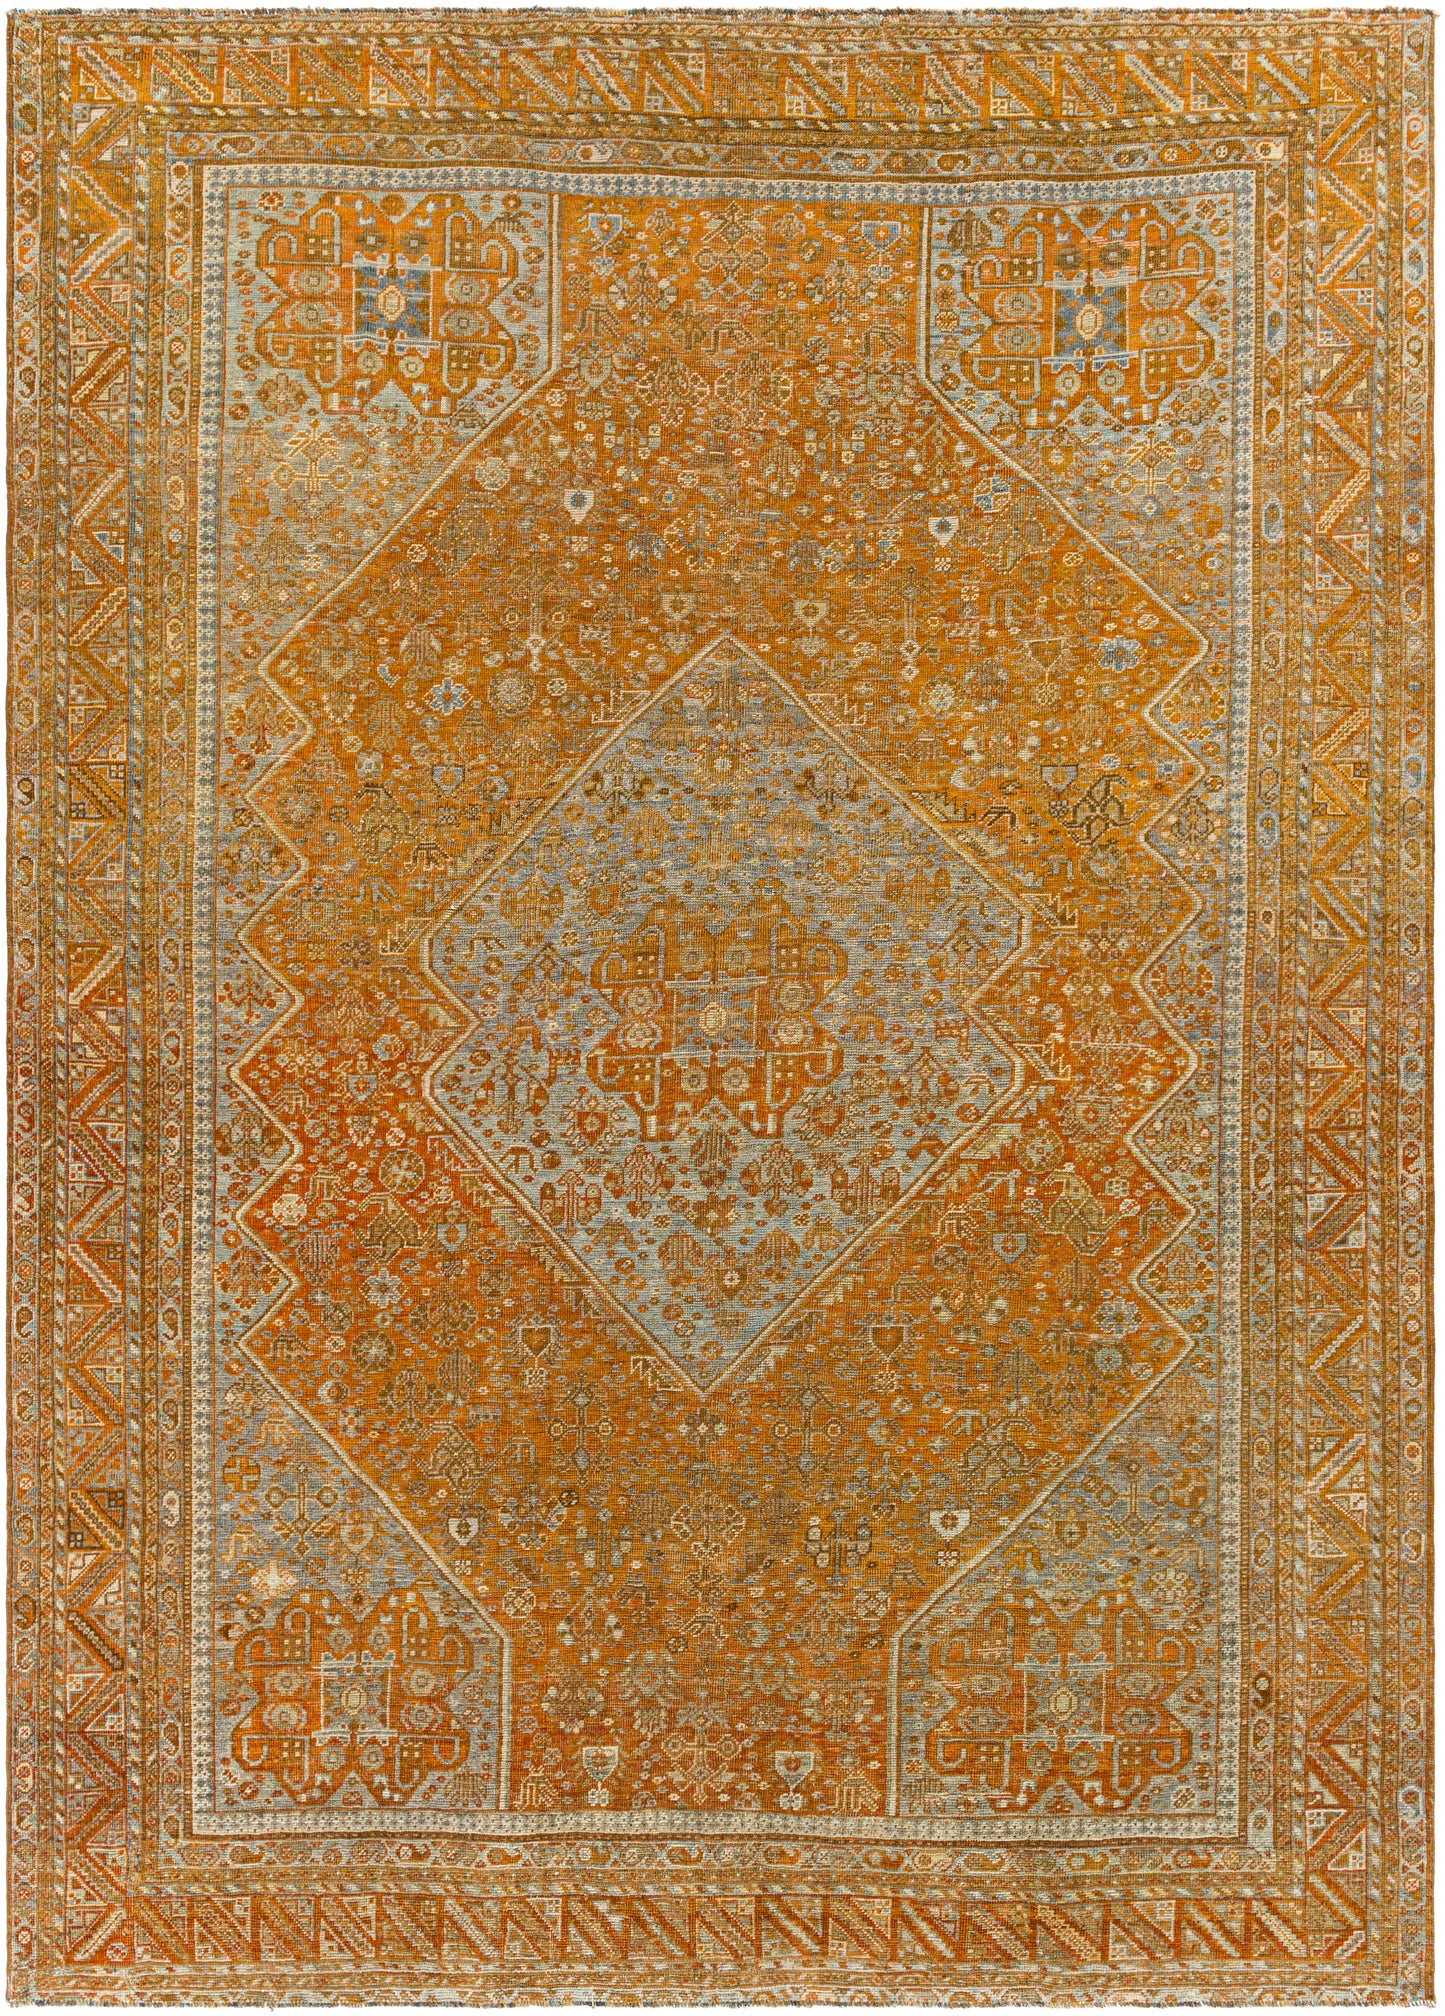 Antique One of a Kind 29796 Hand Knotted Wool Indoor Area Rug by Surya Rugs